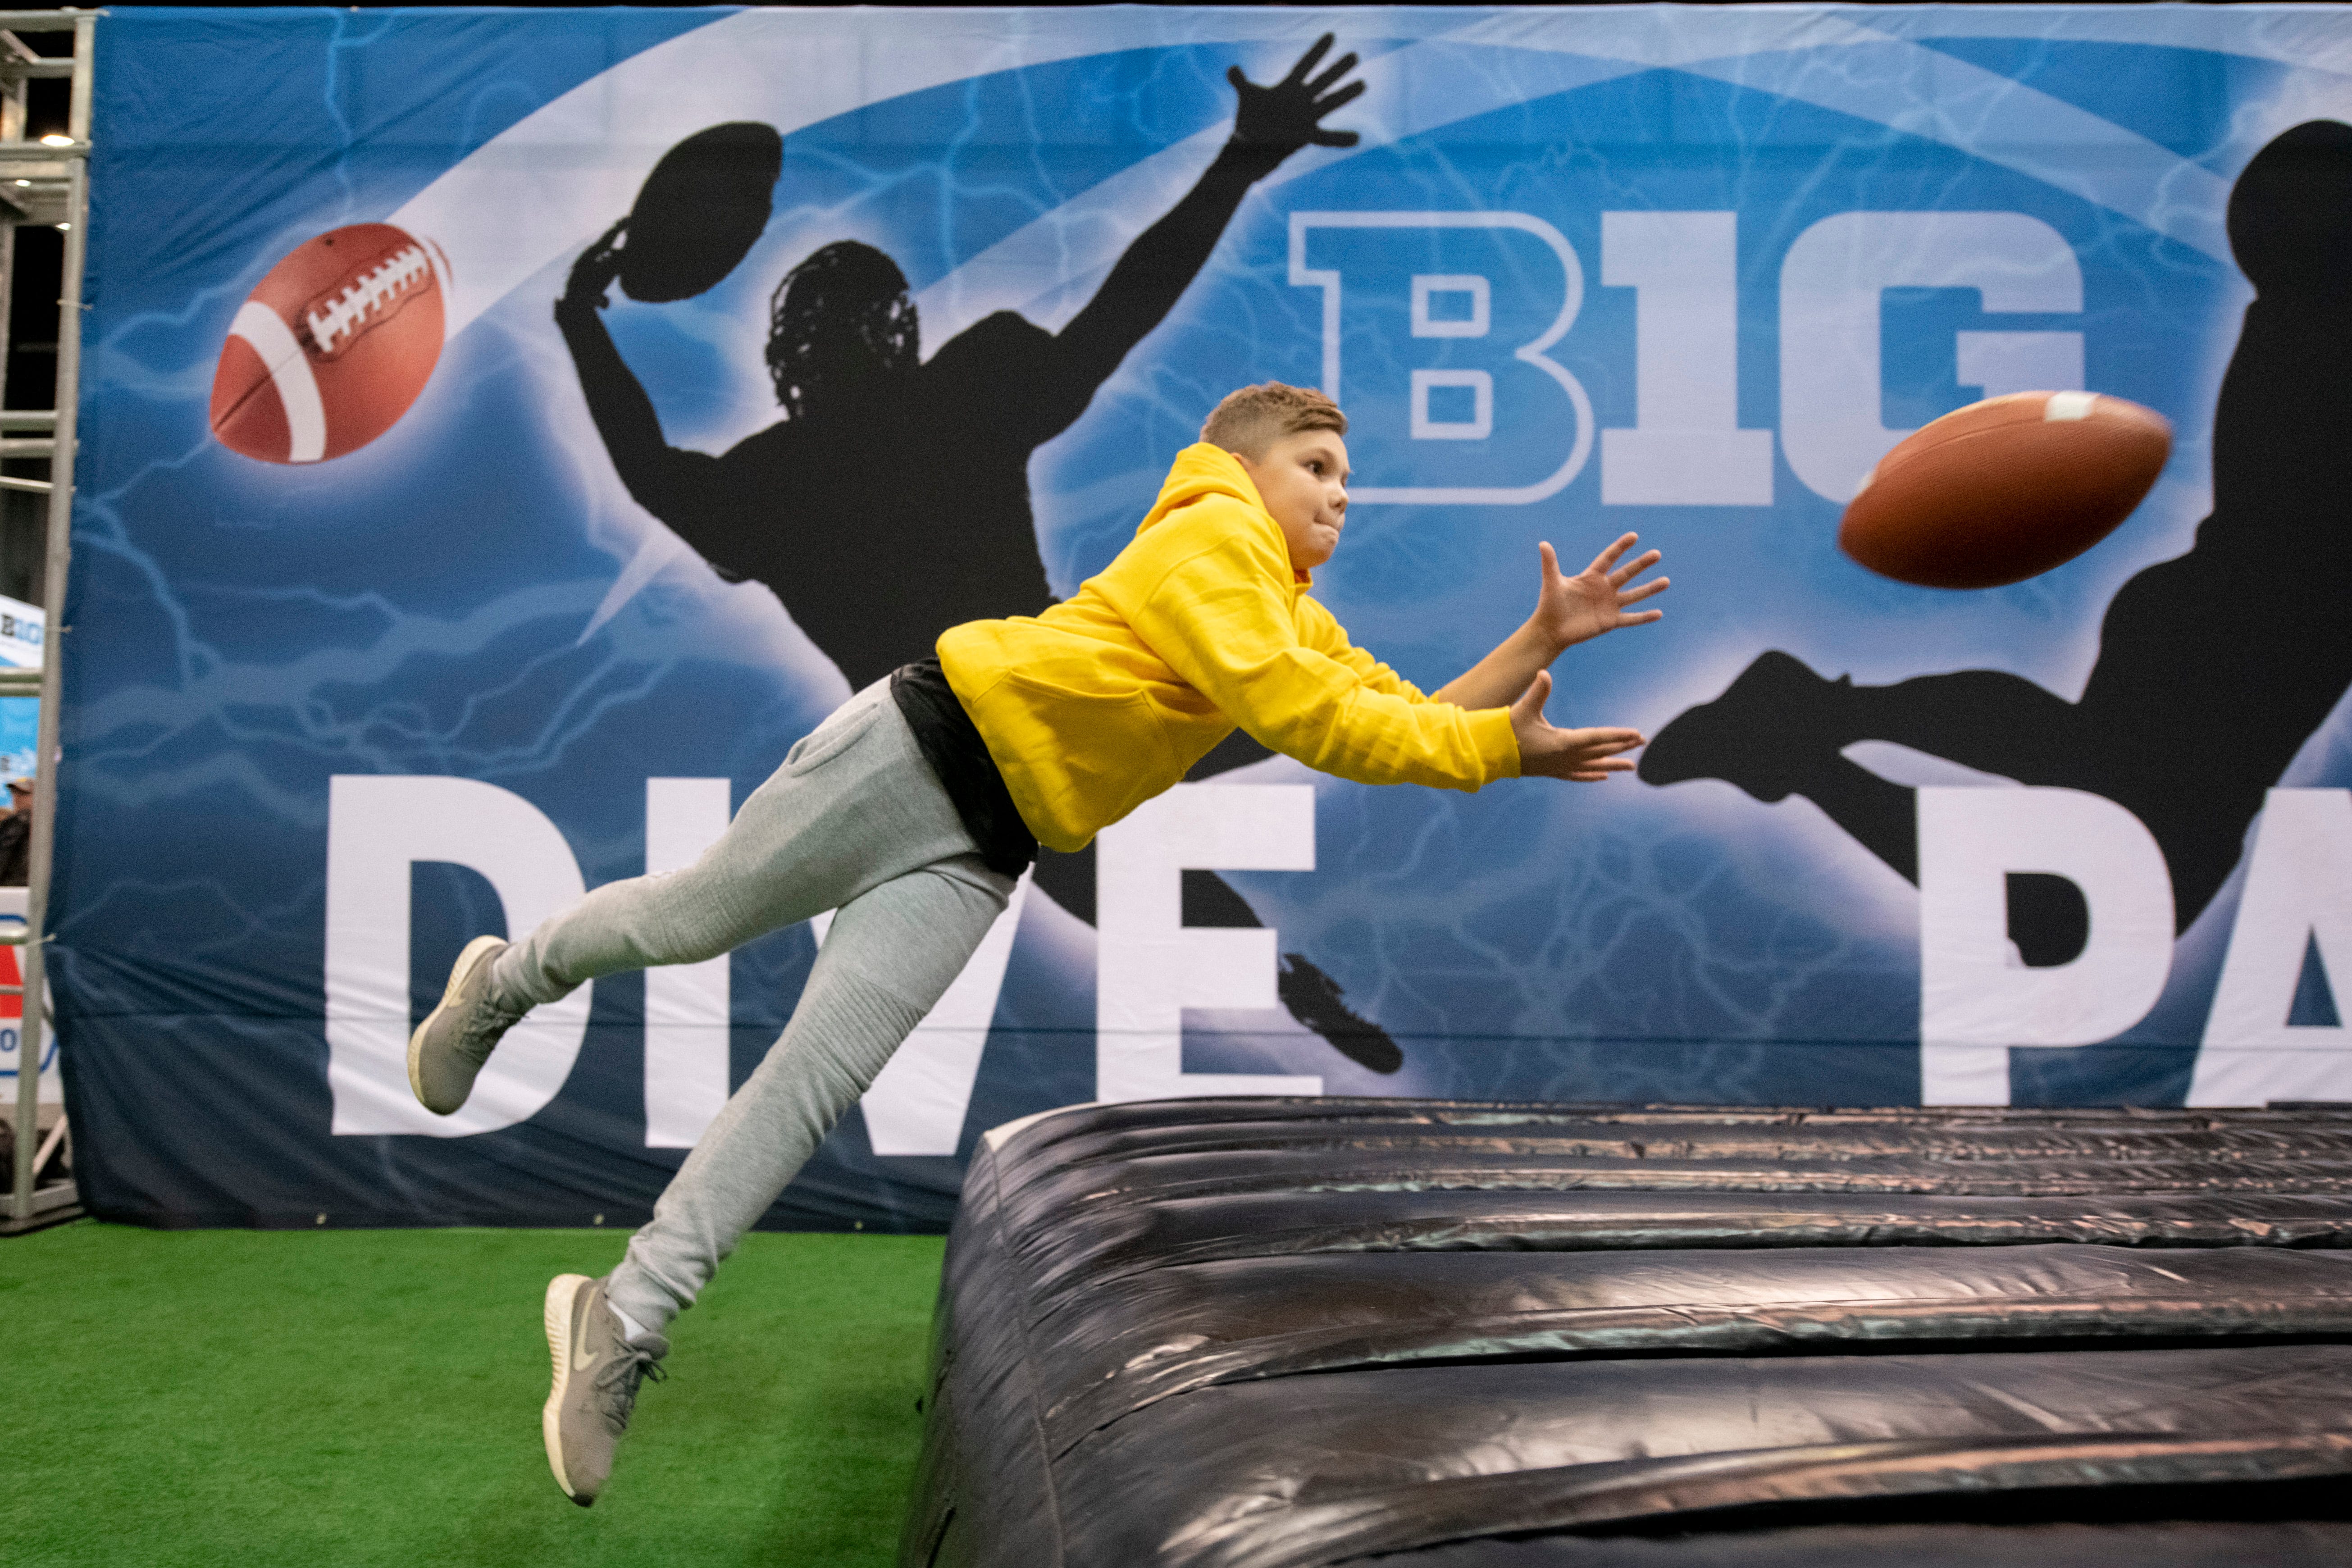 Twelve-year-old Matt Noe, of Crescent Springs, Ky., catches a pass while having fun at the Fan Fest